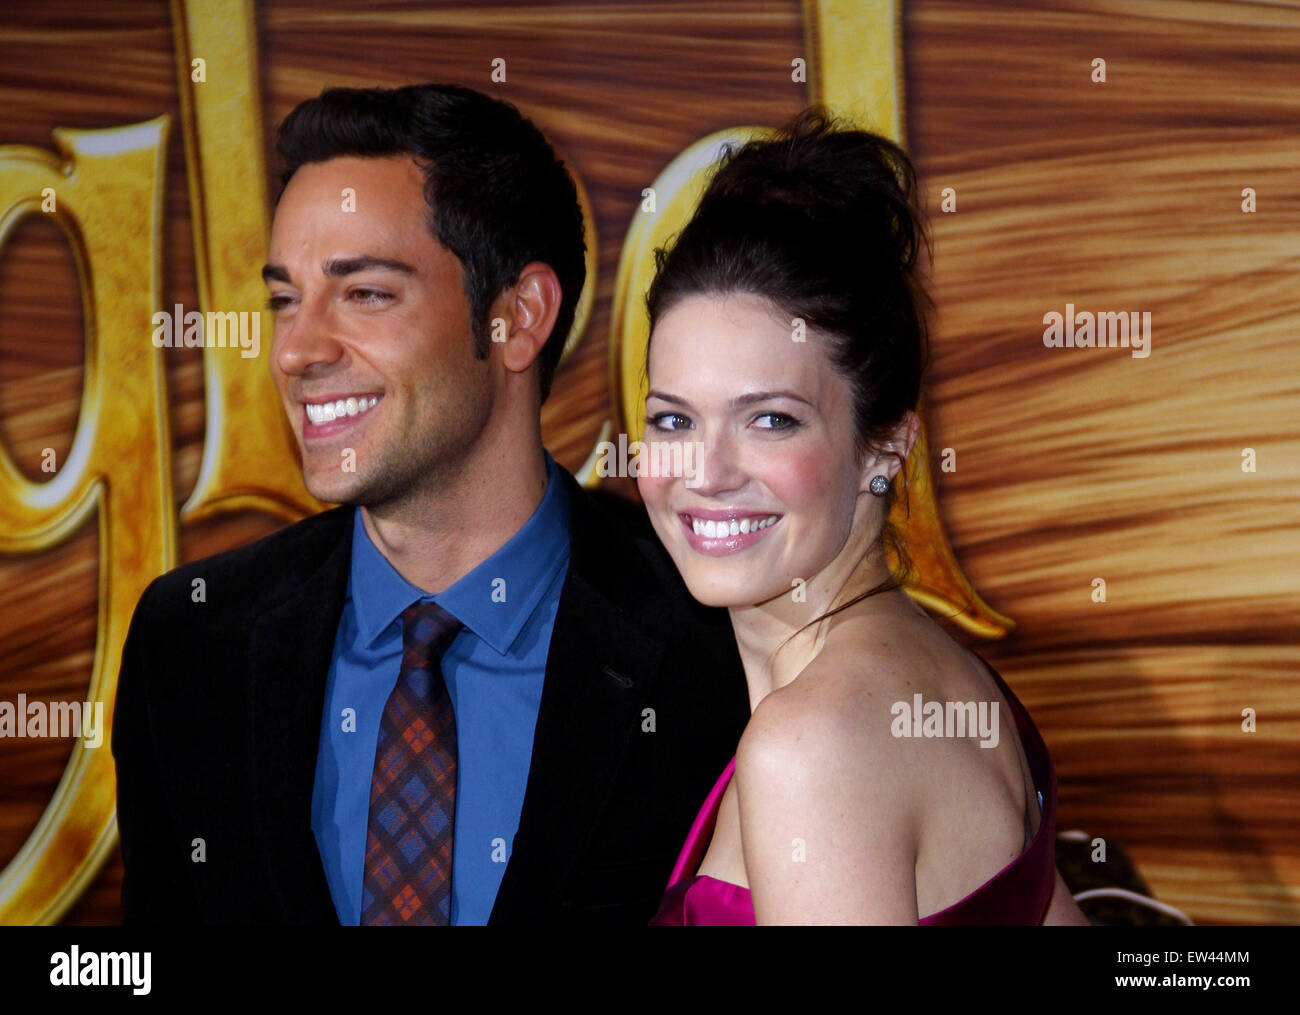 Zachary Levi and Mandy Moore at the Los Angeles premiere of 'Tangled' at the El Capitan Theater in Hollywood - Alamy